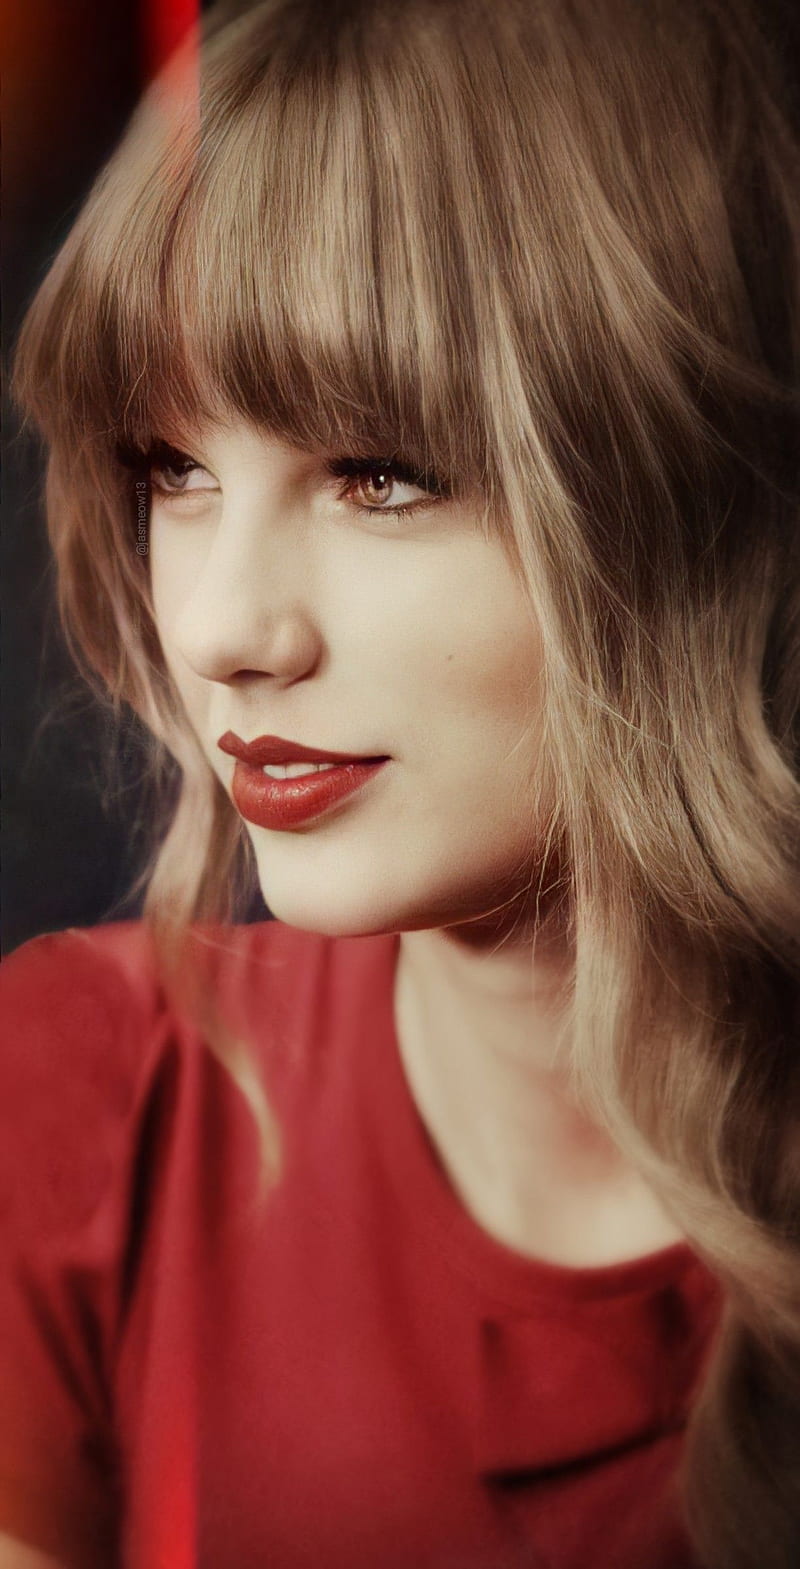 taylor swift with straight hair wallpaper